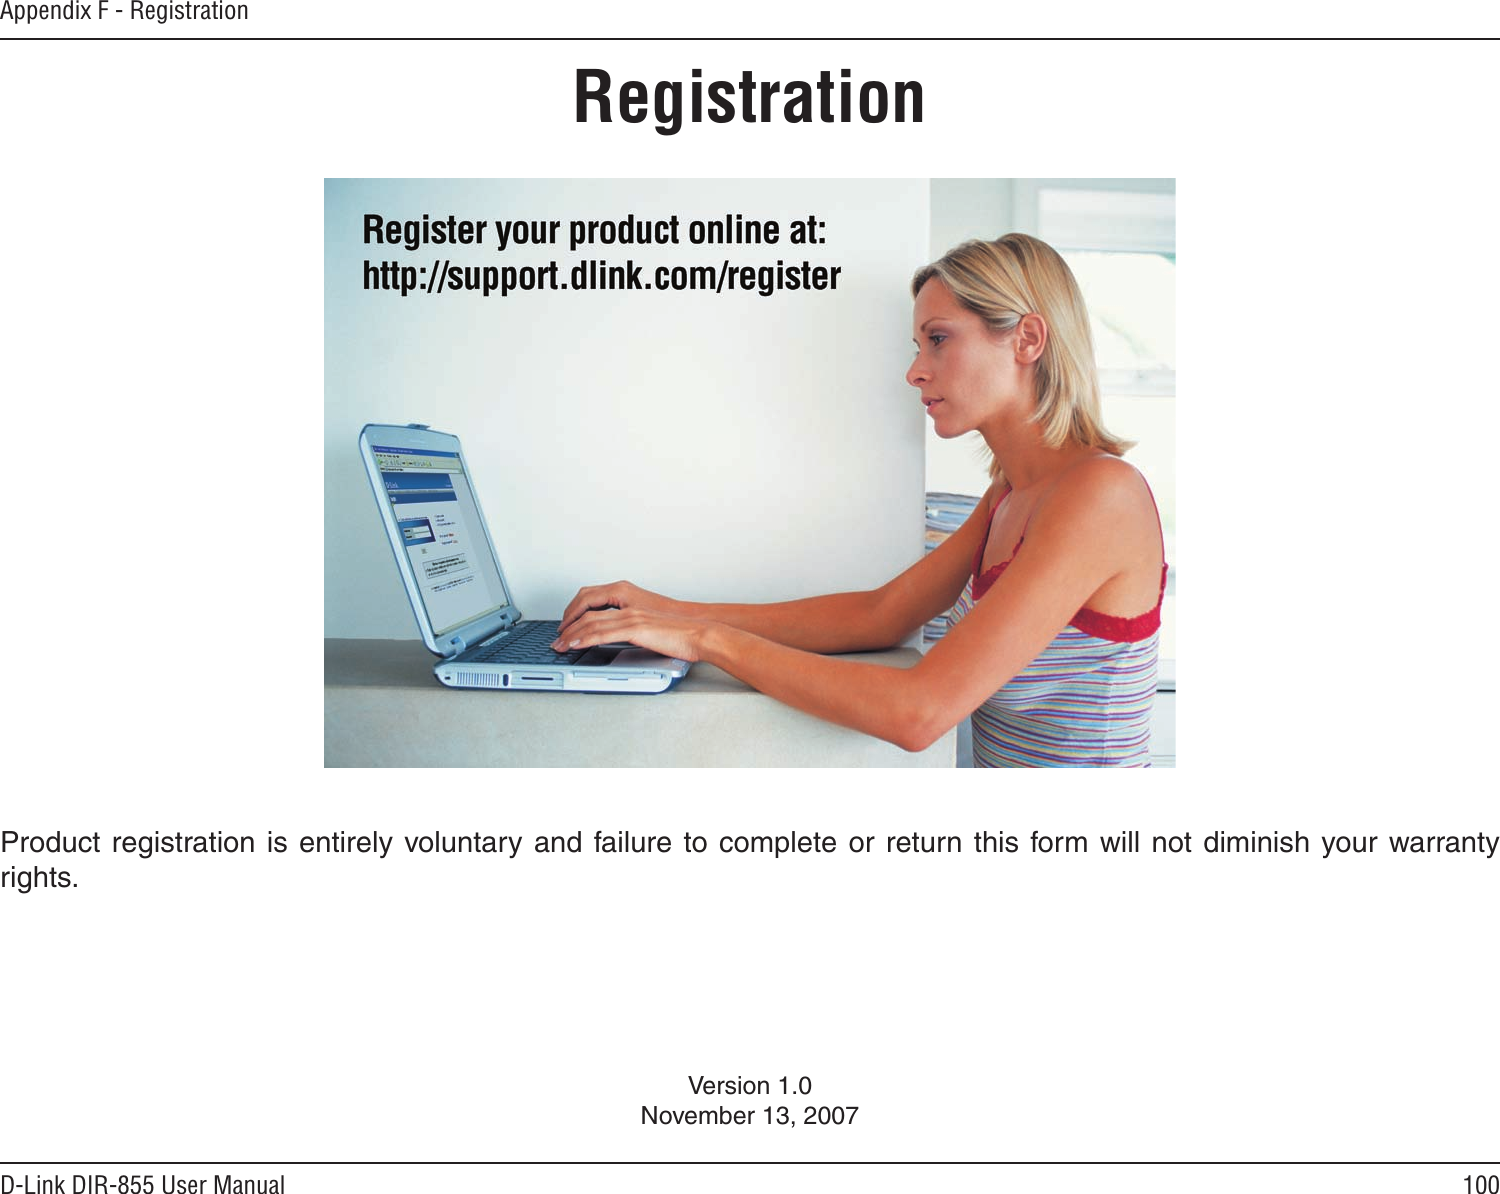 100D-Link DIR-855 User ManualAppendix F - RegistrationVersion 1.0November 13, 2007Product registration is entirely voluntary and failure to complete or  return this form will not diminish your warranty rights.Registration